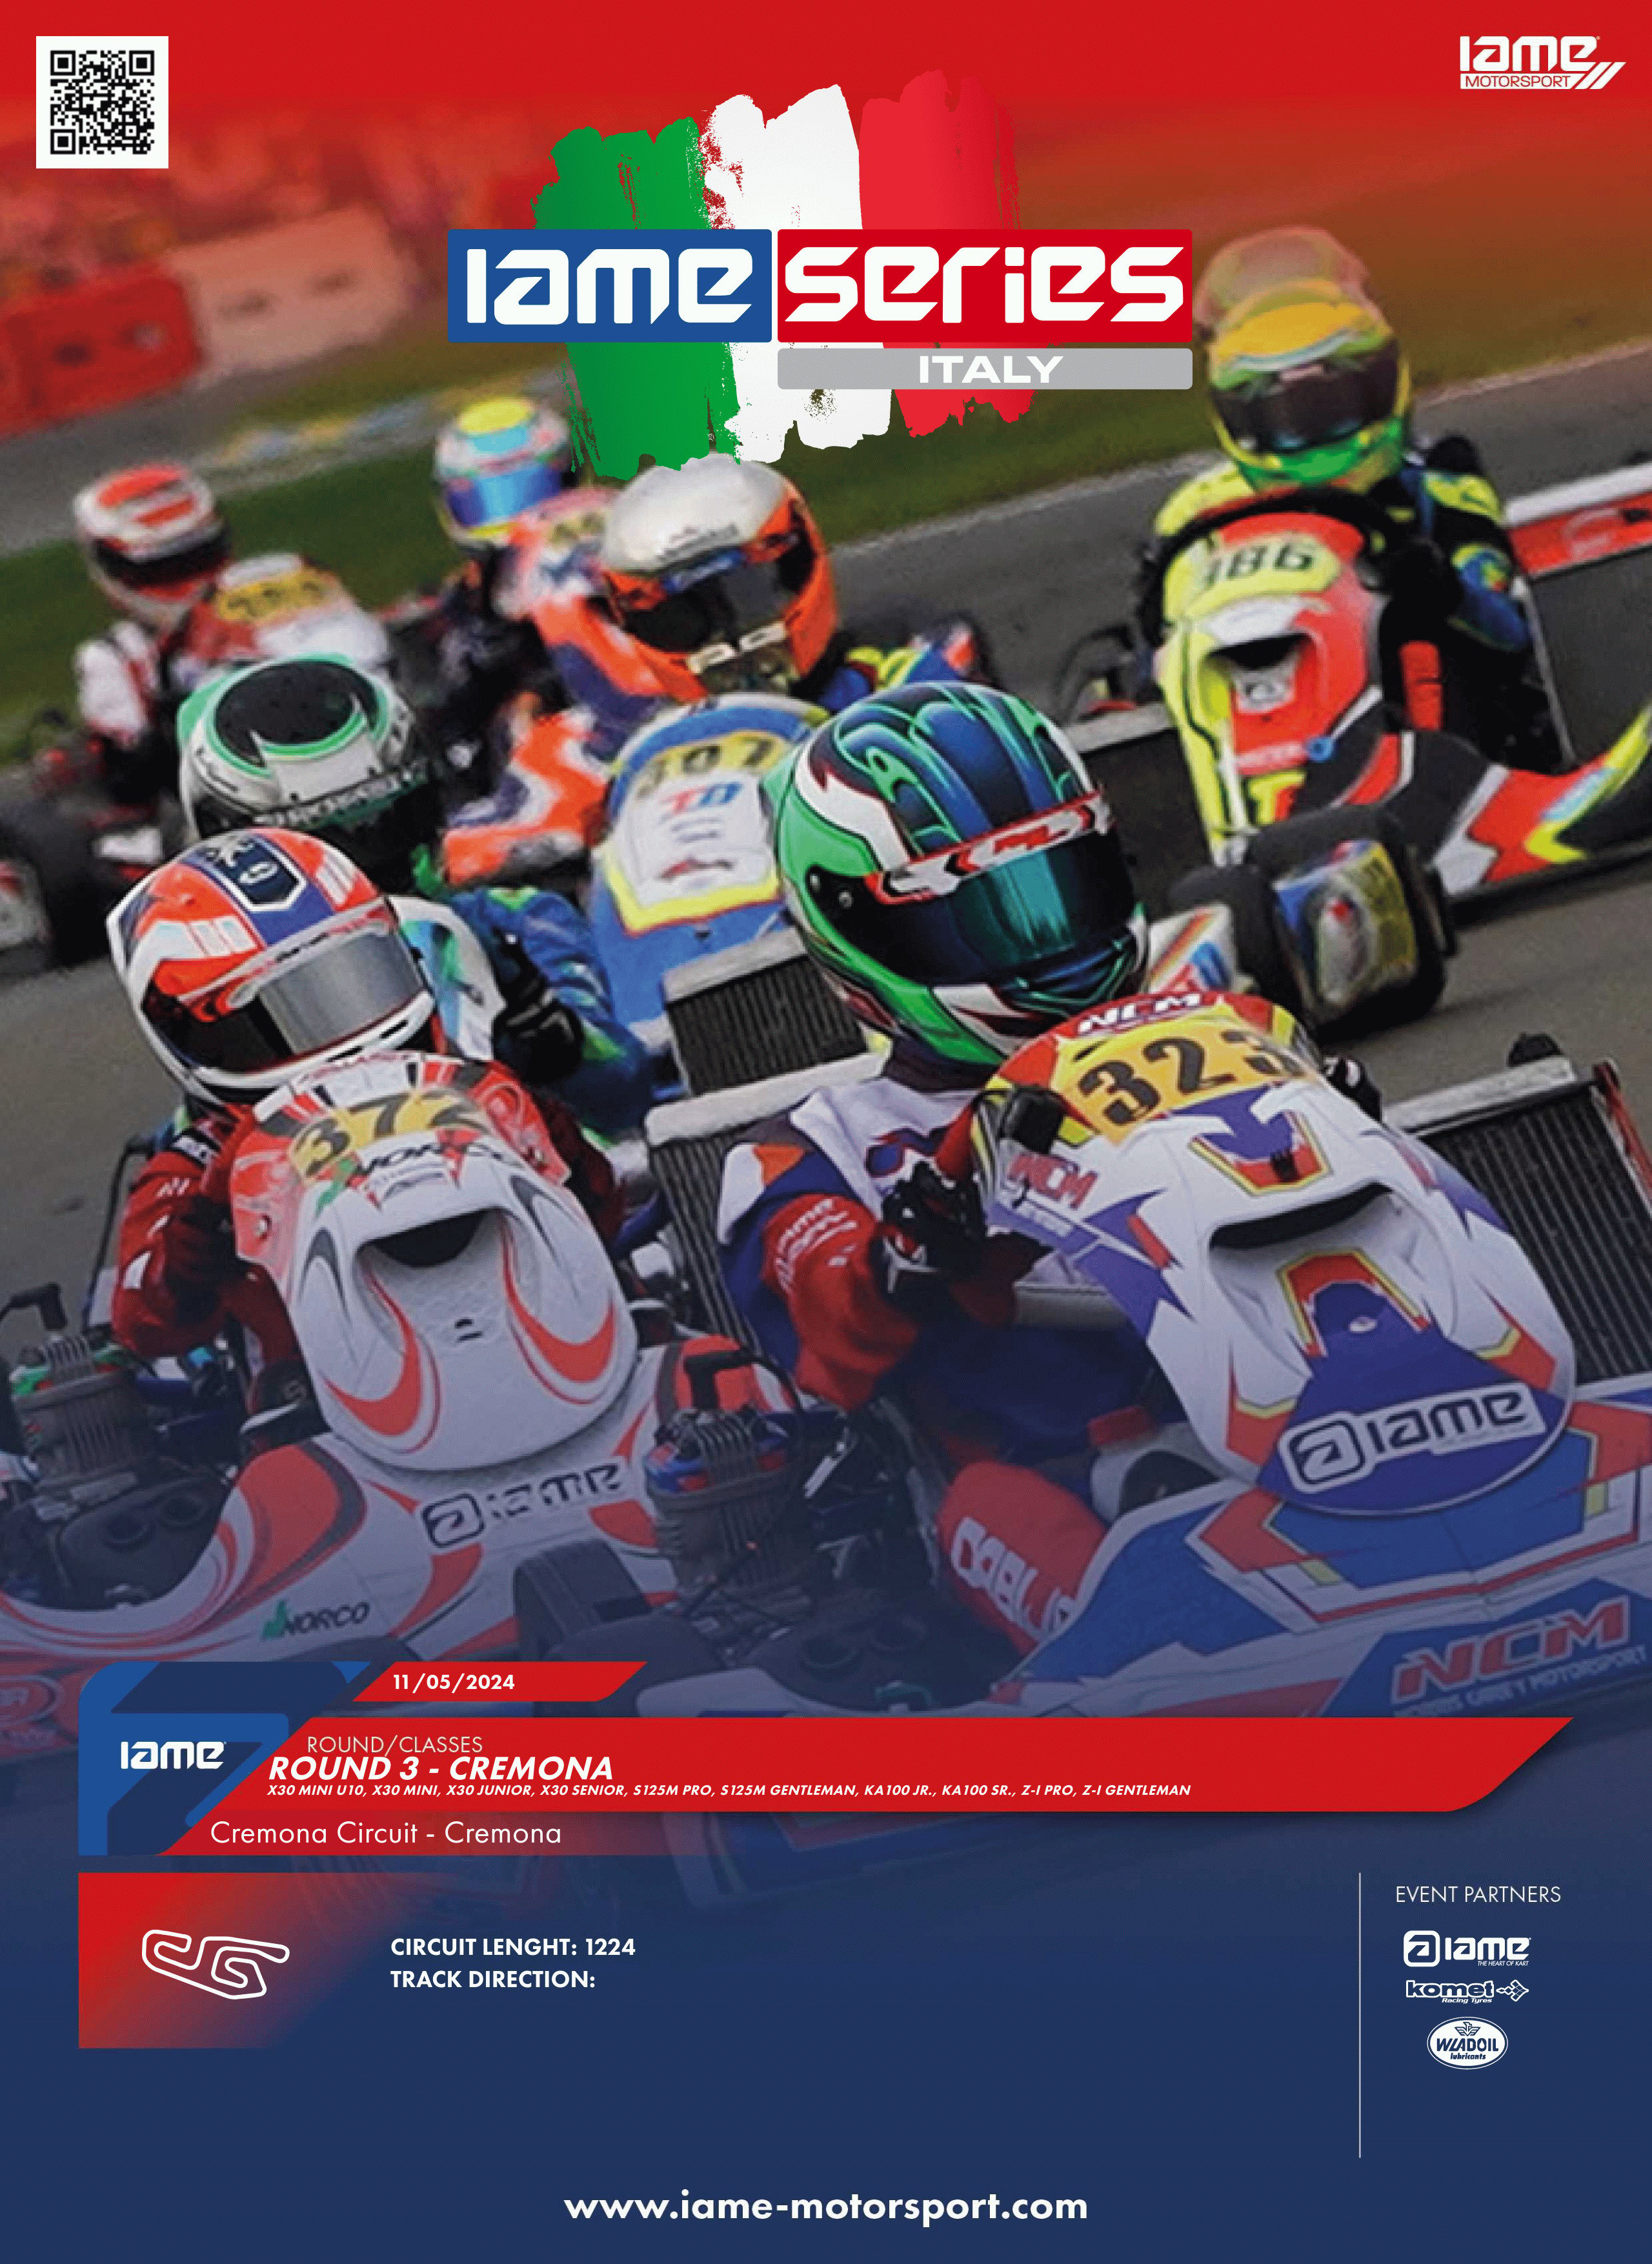 Get Ready for an Adrenaline-Fueled Weekend at the IAME Series Italy Round 3 in Cremona